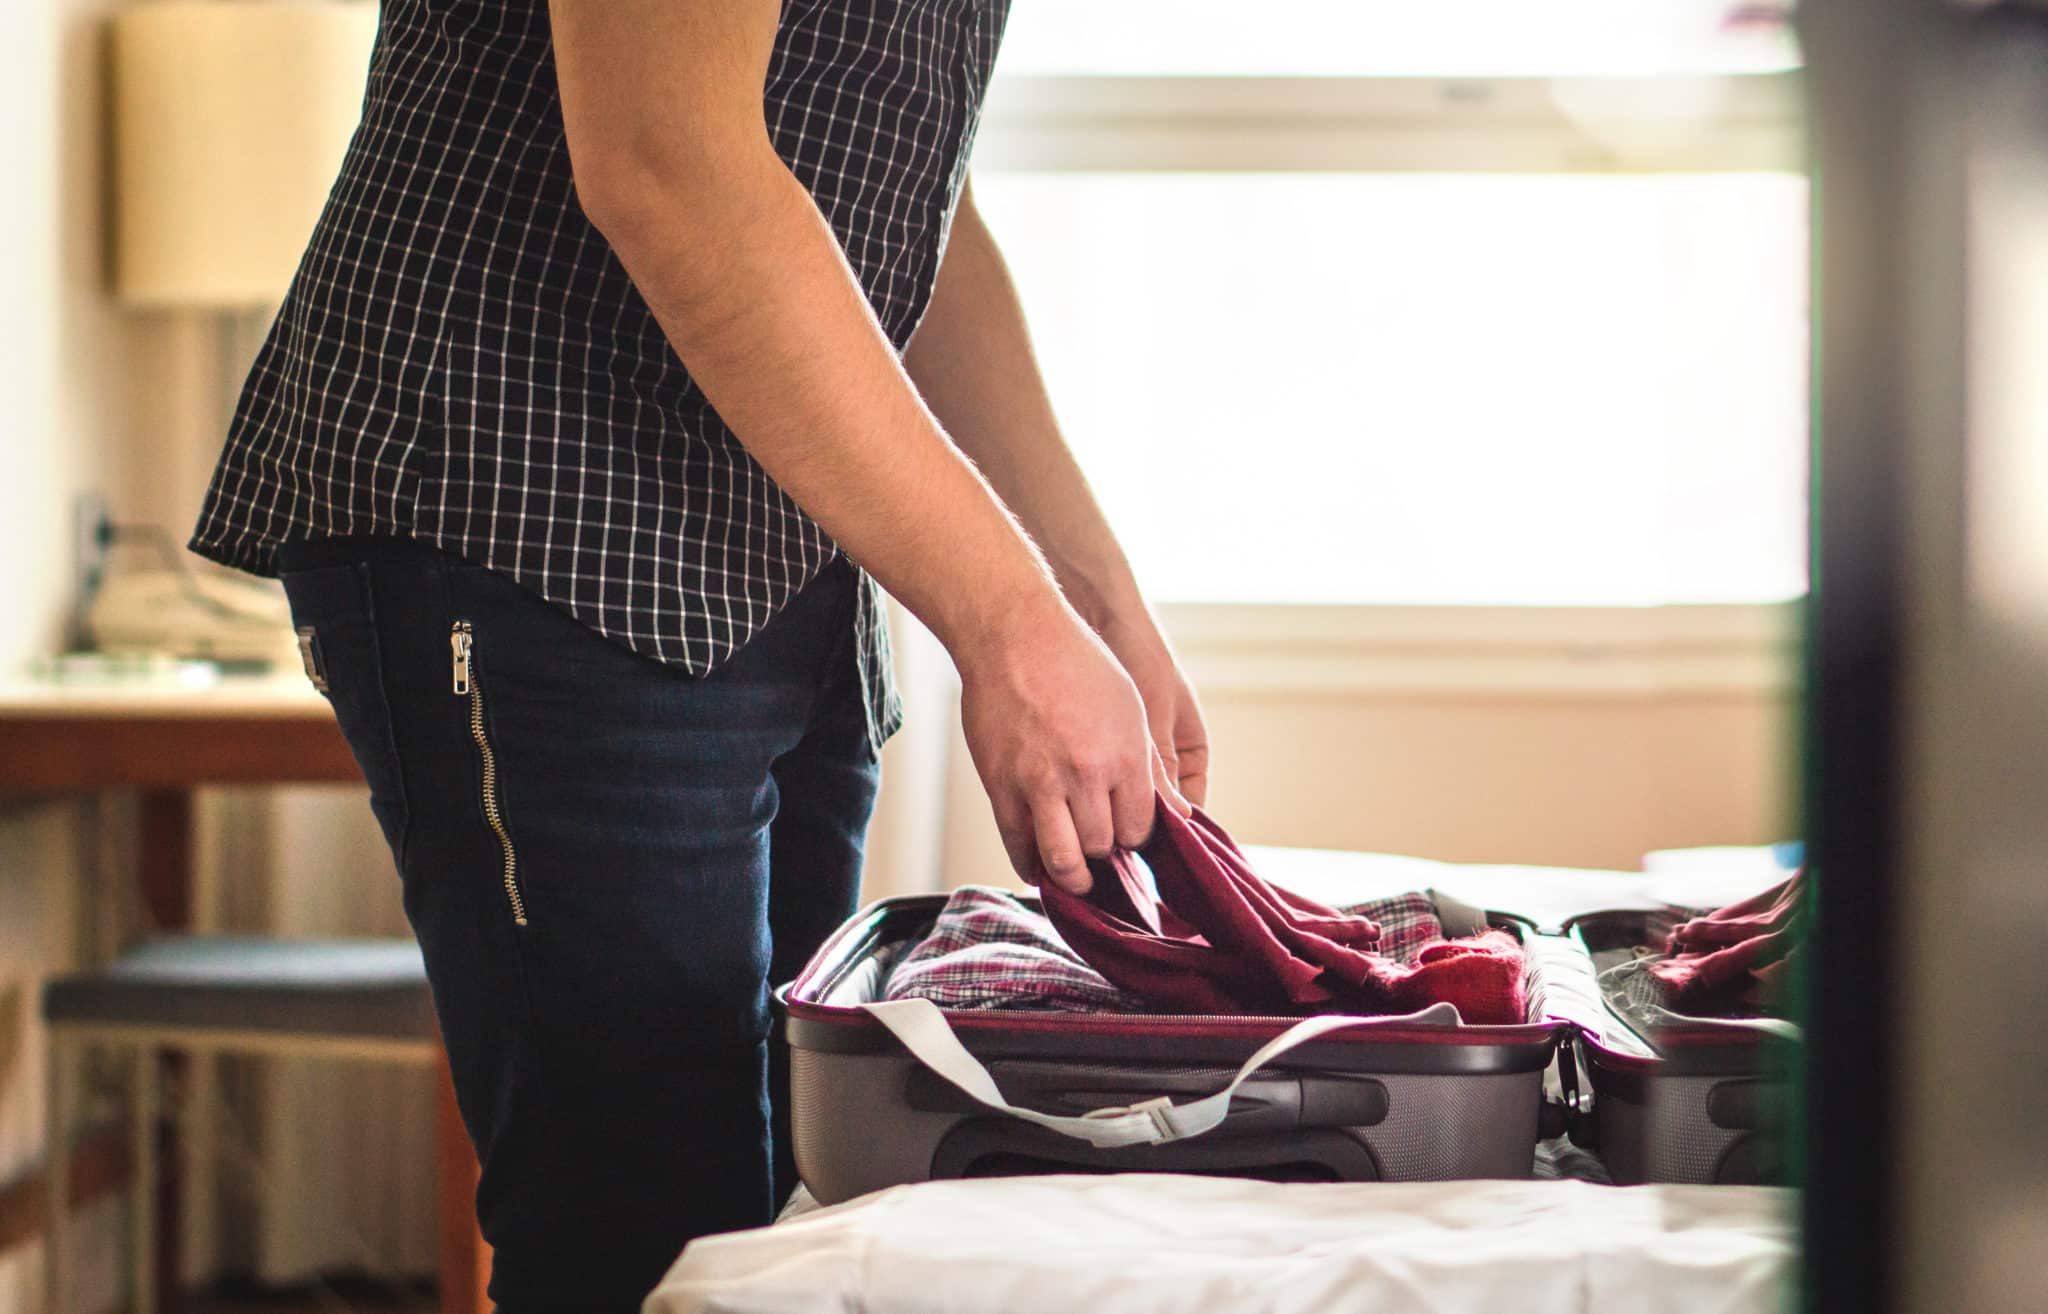 Packing suitcase in hotel room. Young man folding t-shirt on baggage in home bedroom. Open luggage on bed for vacation preparing.